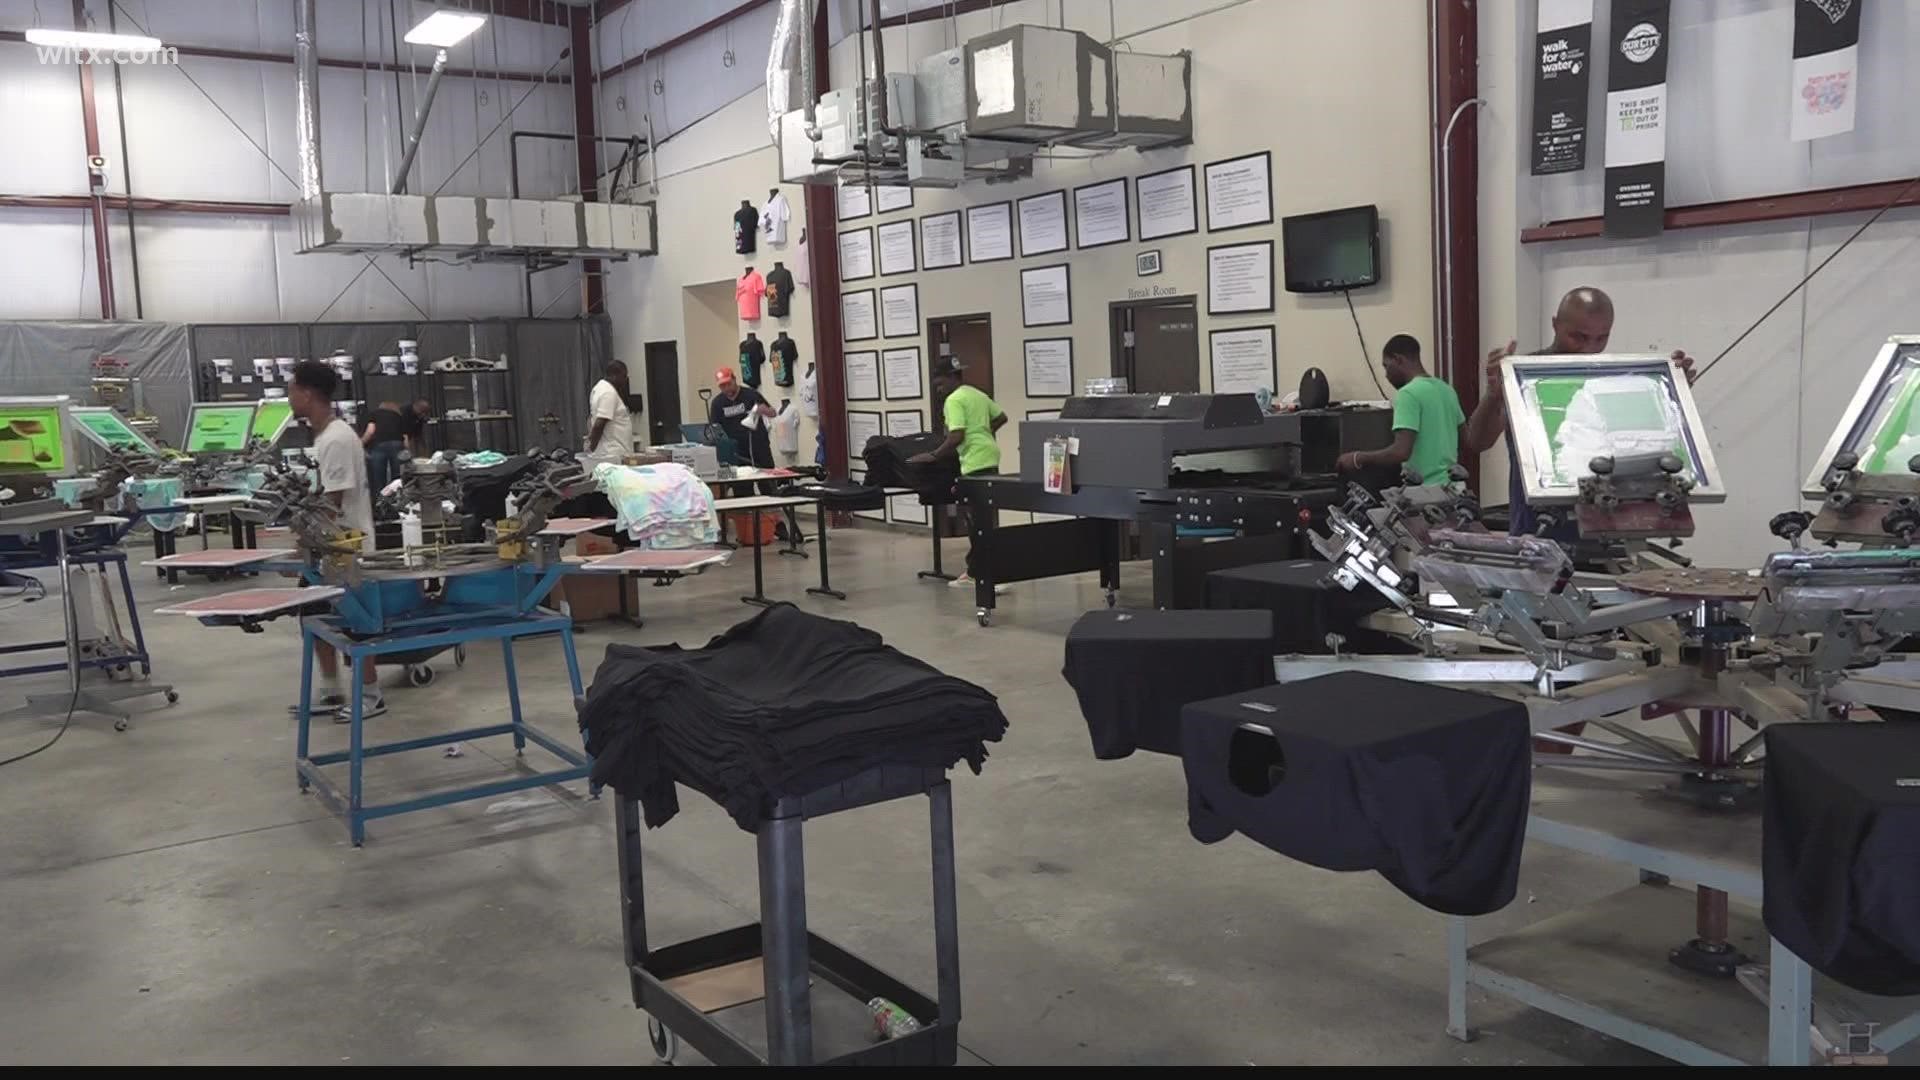 'Turn 90' a nonprofit helps to put people to work who have formerly done jail time.